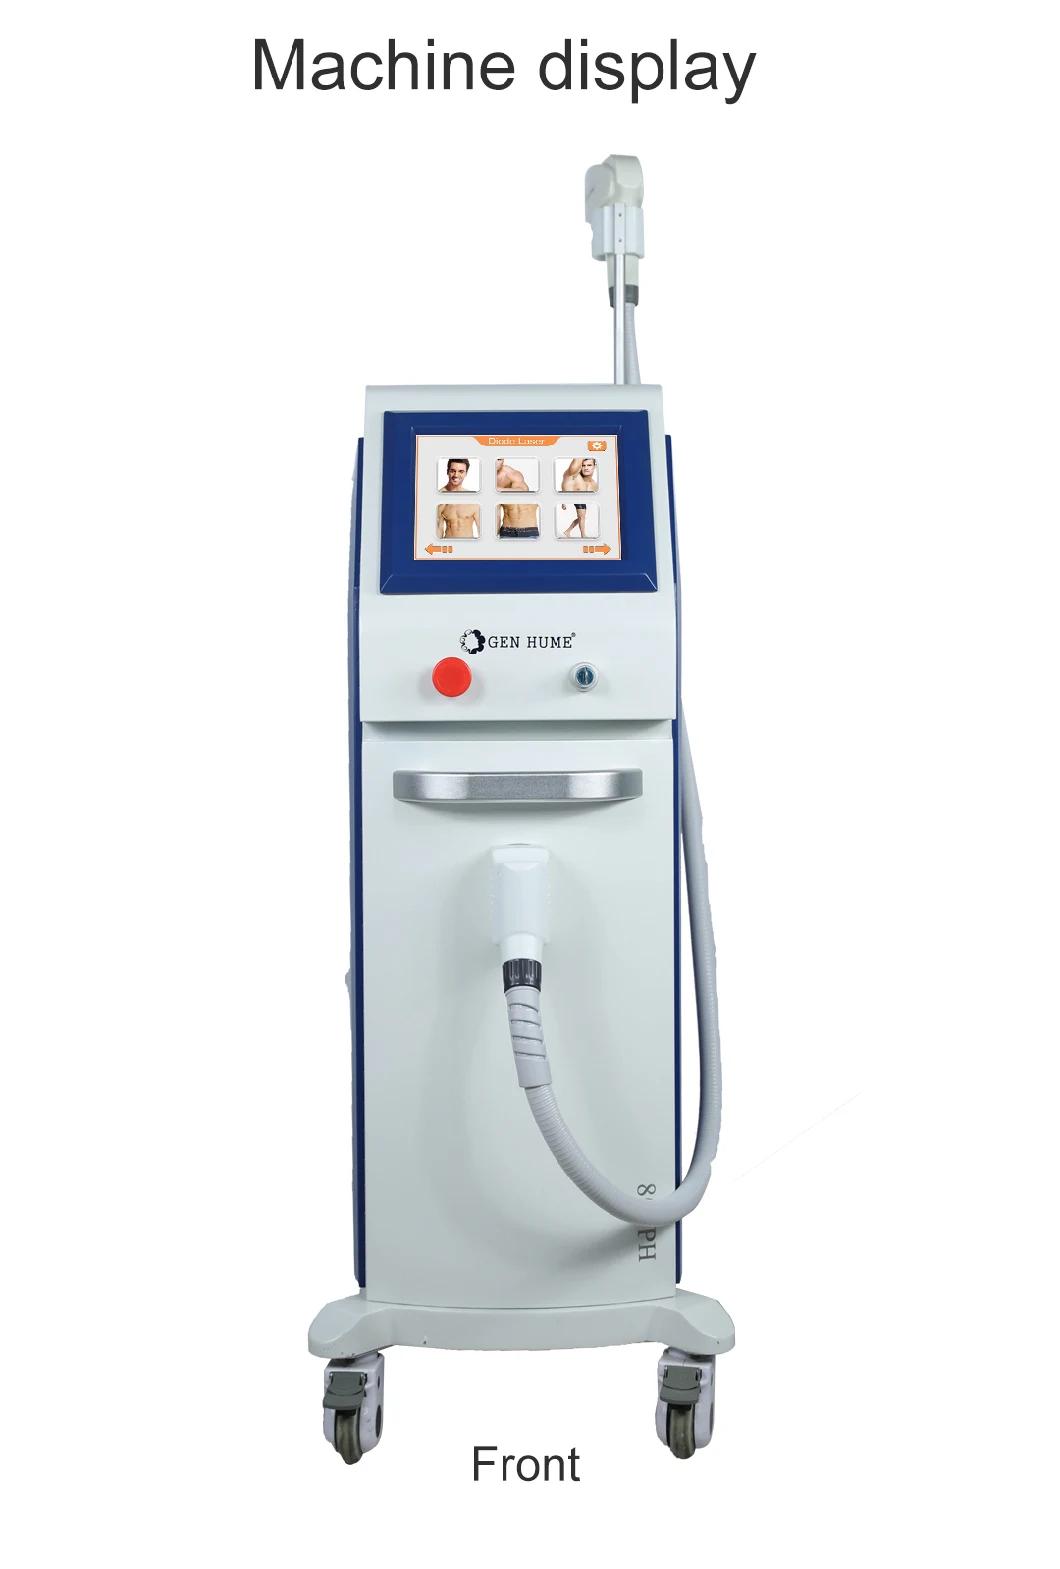 2022 808nm Laser Hair Removal Machine 808nm Machine Beauty Equipment Hair Removal Diode Laser Genhume